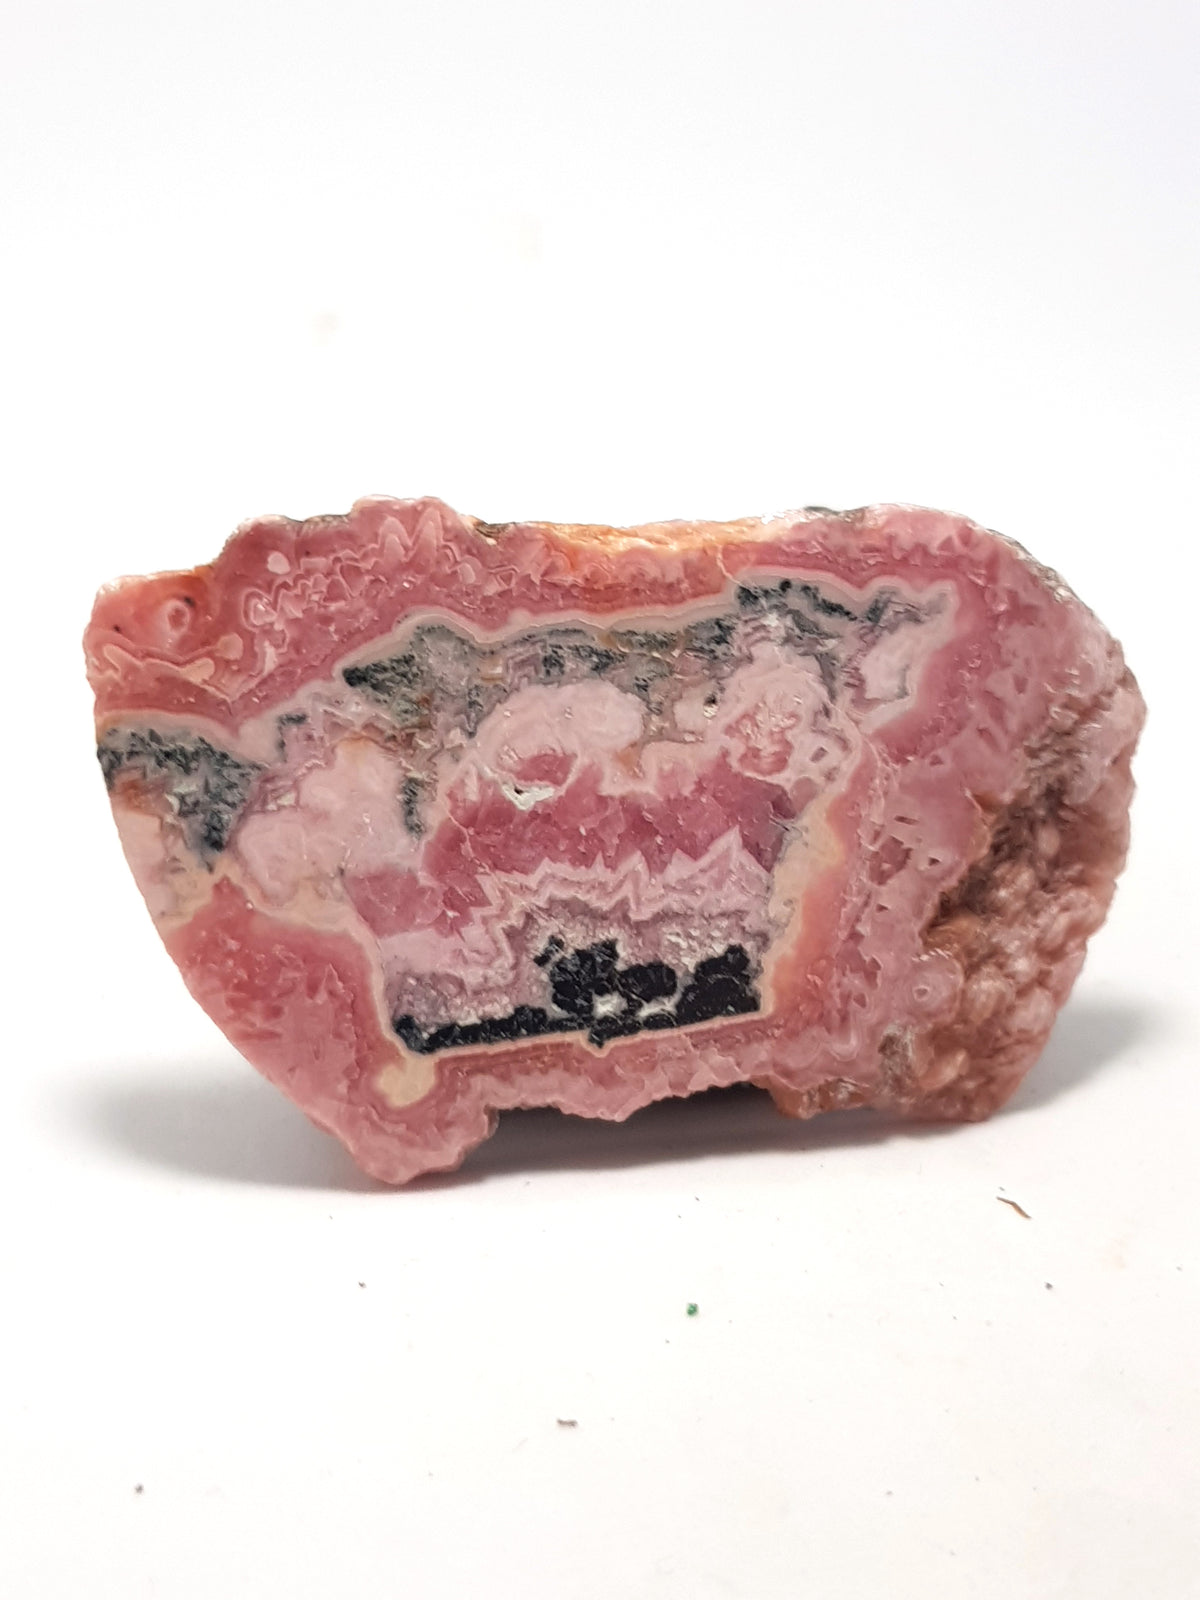 Rhodocrocite slice. It is banded. The bands are different shades of pink. There is are black and grey bands n the centre of the sample.